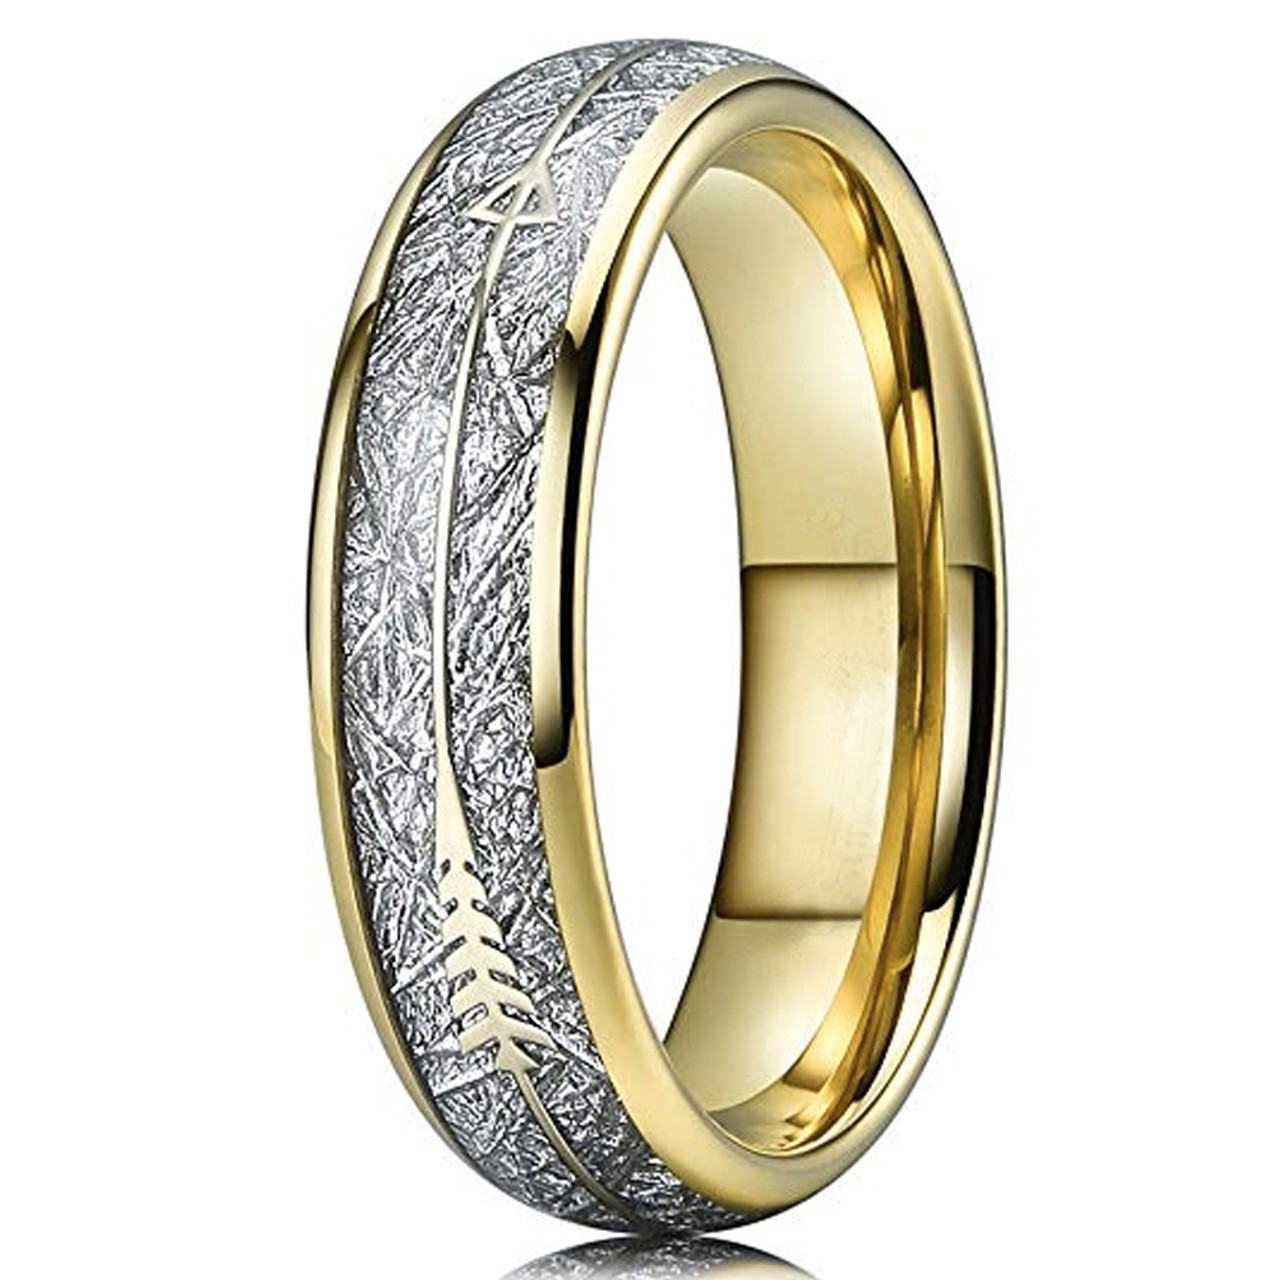 (6mm)  Unisex or Women's Tungsten Carbide Wedding ring bands. 18K Plated Yellow Gold Tone Cupid's Arrow Ring with Inspired Meteorite Inlay. Tungsten Carbide Domed Top Ring.